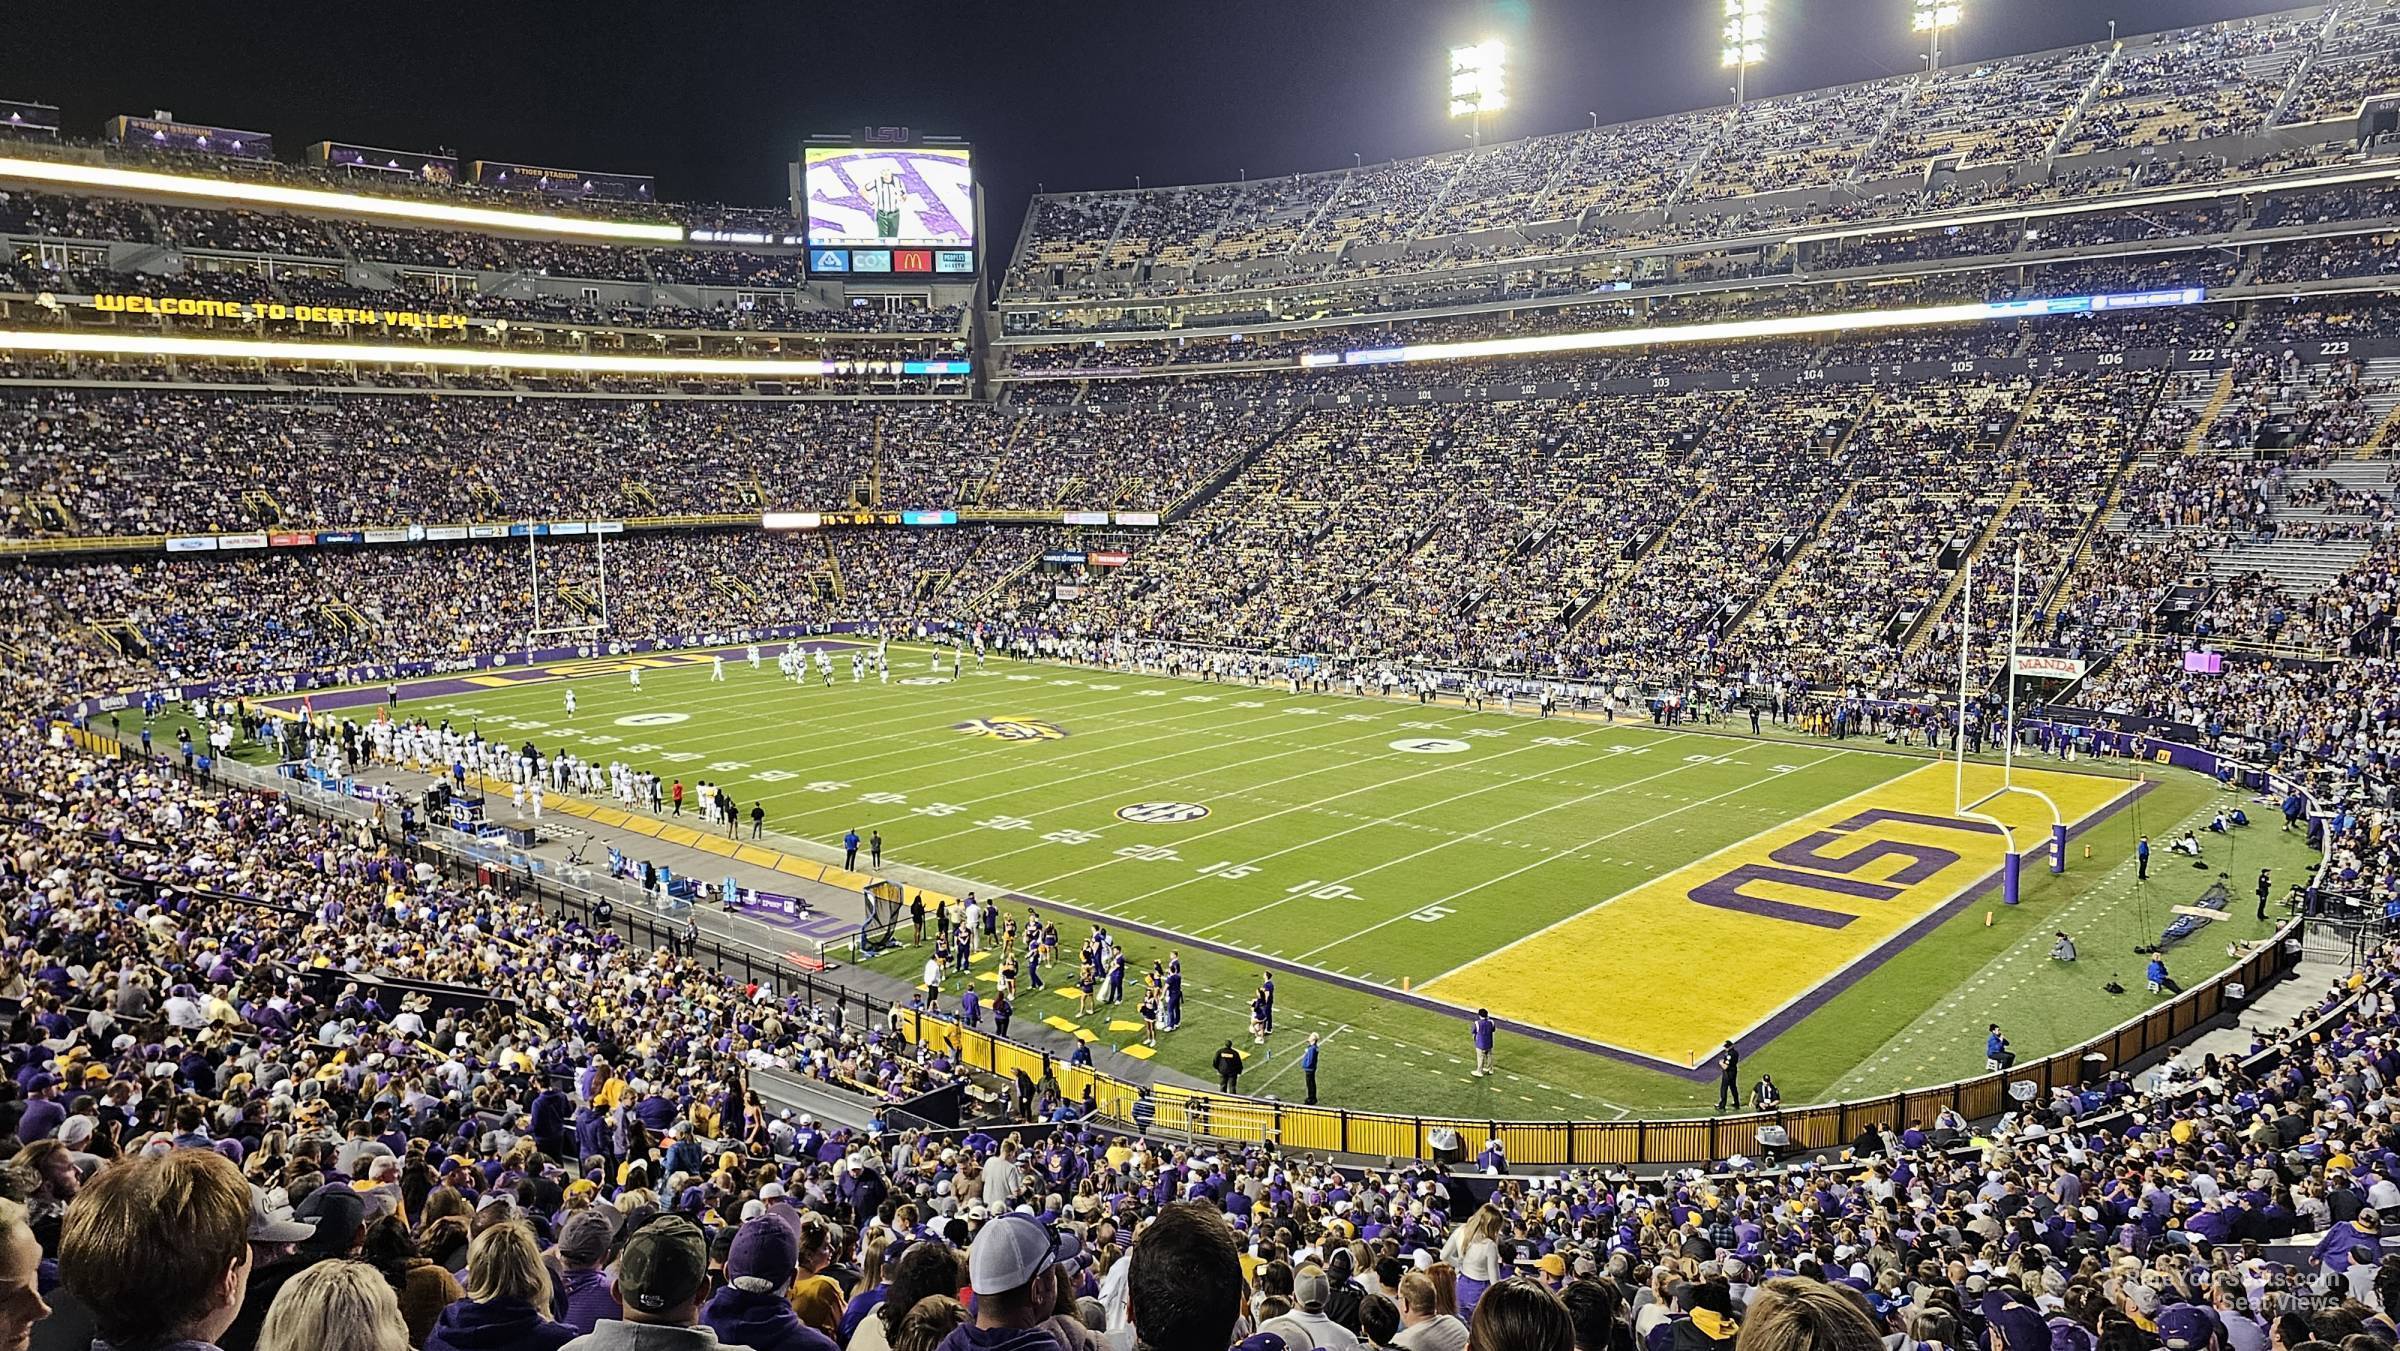 section 241, row 1 seat view  - tiger stadium